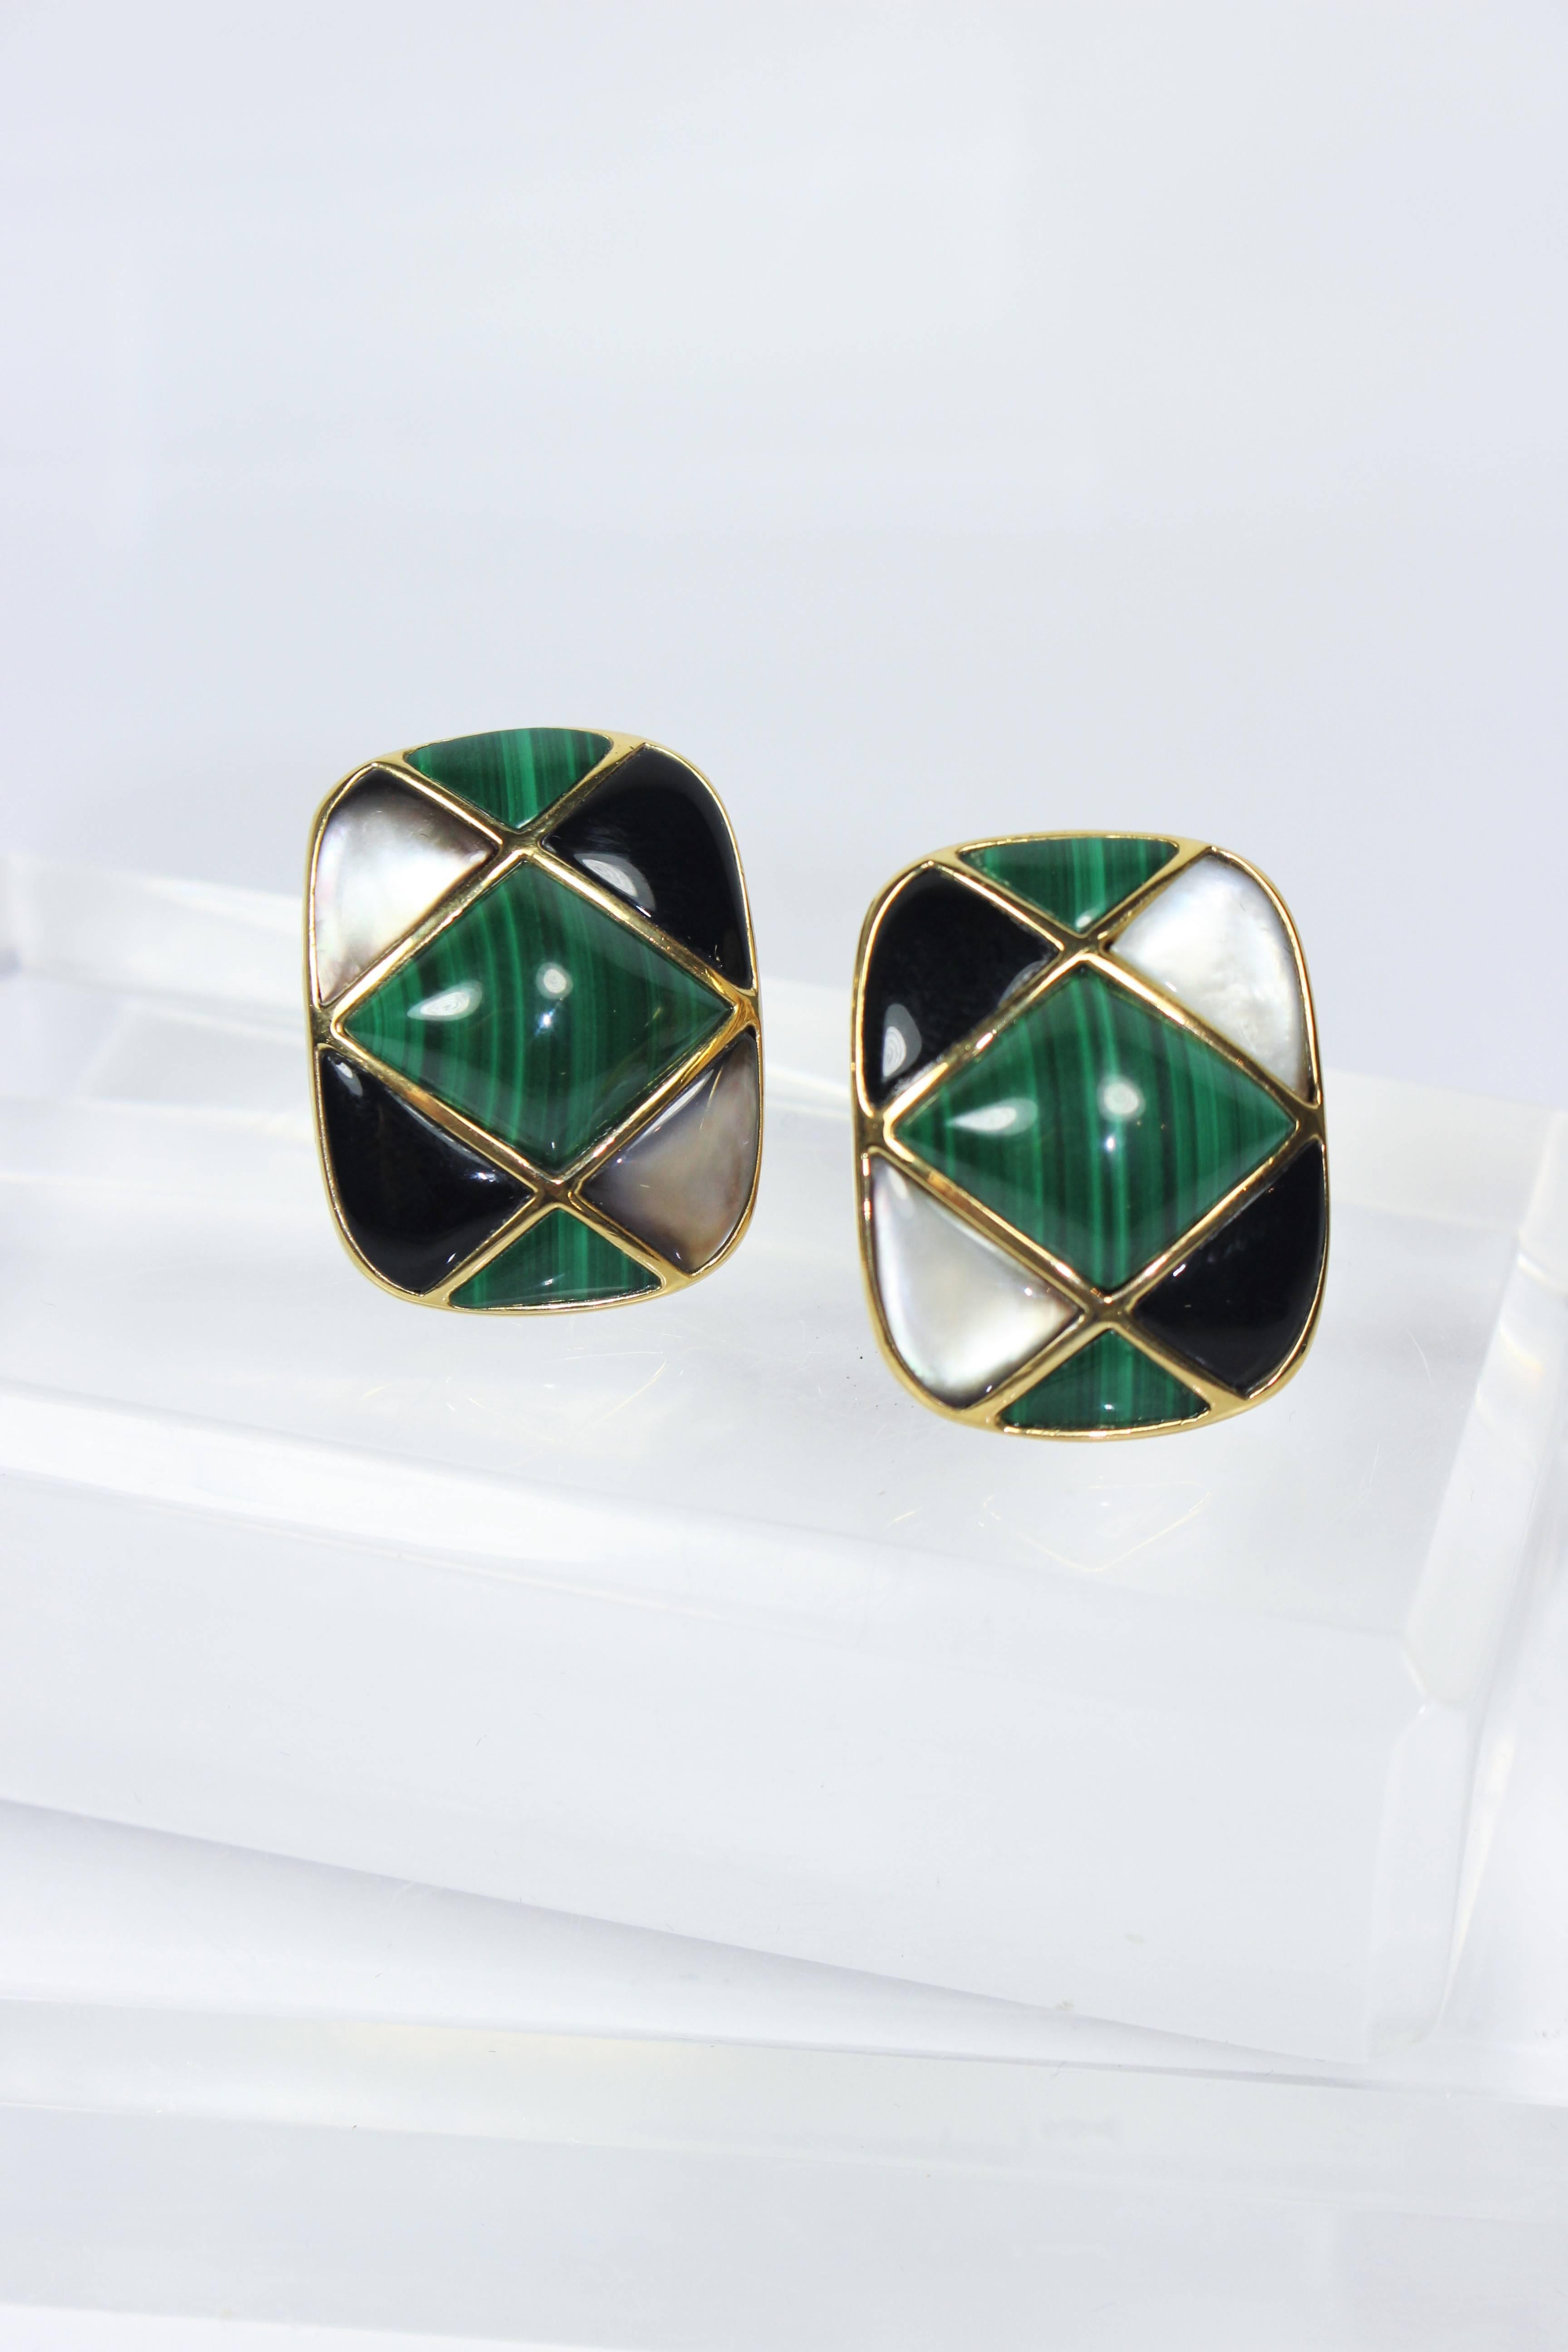 These Kai Yin Lo earrings are composed of a gold plated sterling silver with malachite, onyx, and mother of pearl. They are clip on style. In excellent condition.

**The size in the description box is an estimation; please cross-reference